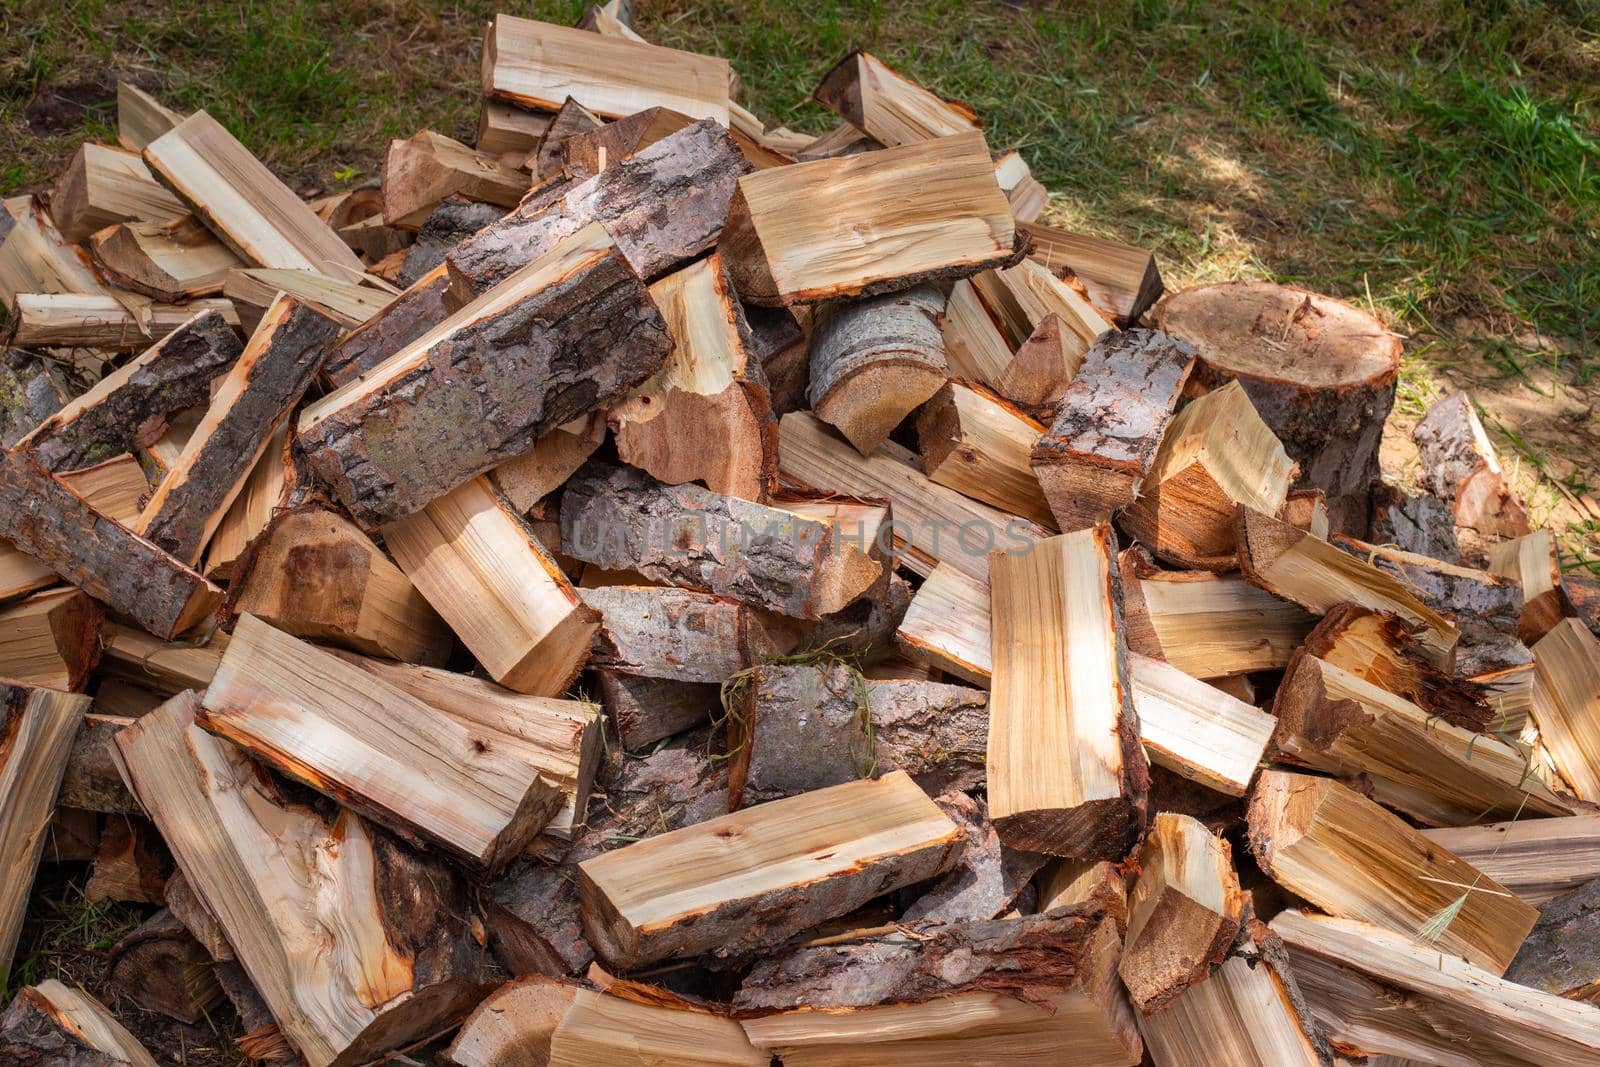 Chopped wood in a heap outside, prepared for the winter to heat the house. Fuel for stove and fireplace.